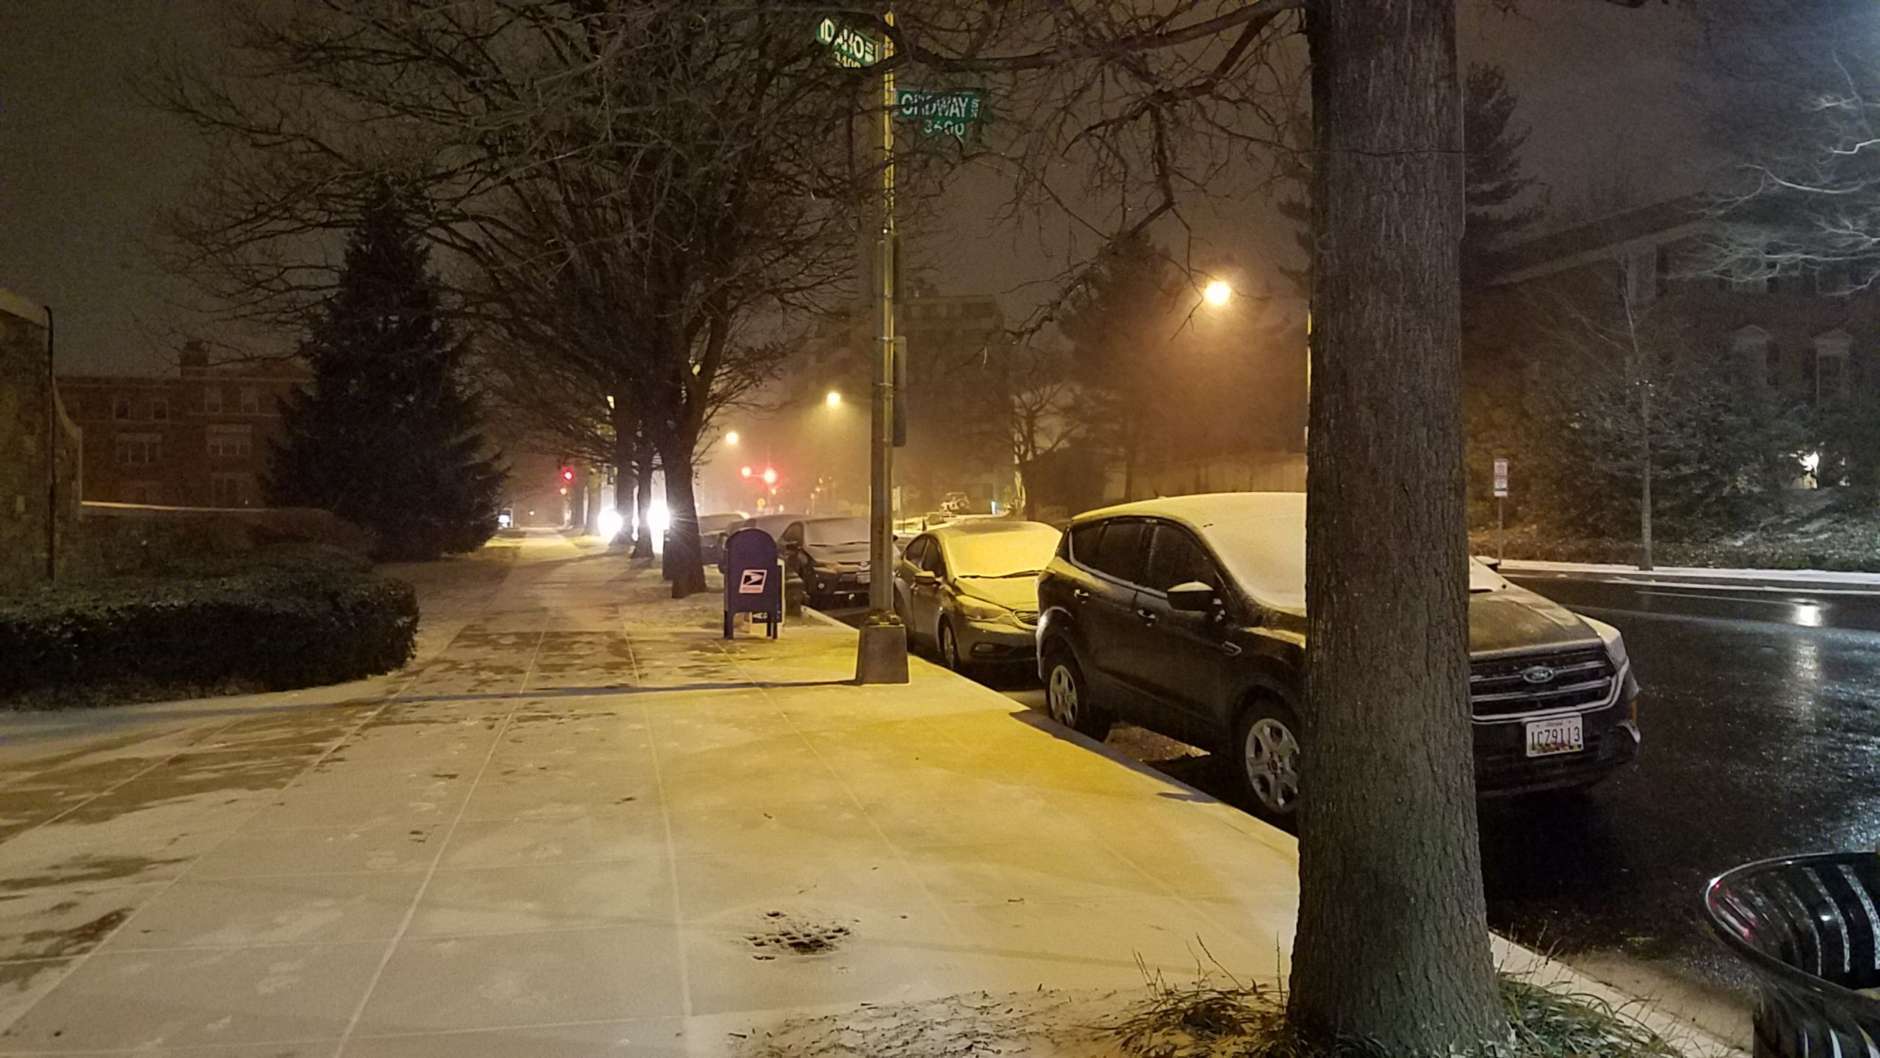 Snow accumulates on cars along Wisconsin Ave. in Northwest D.C. (WTOP/William Vitka)